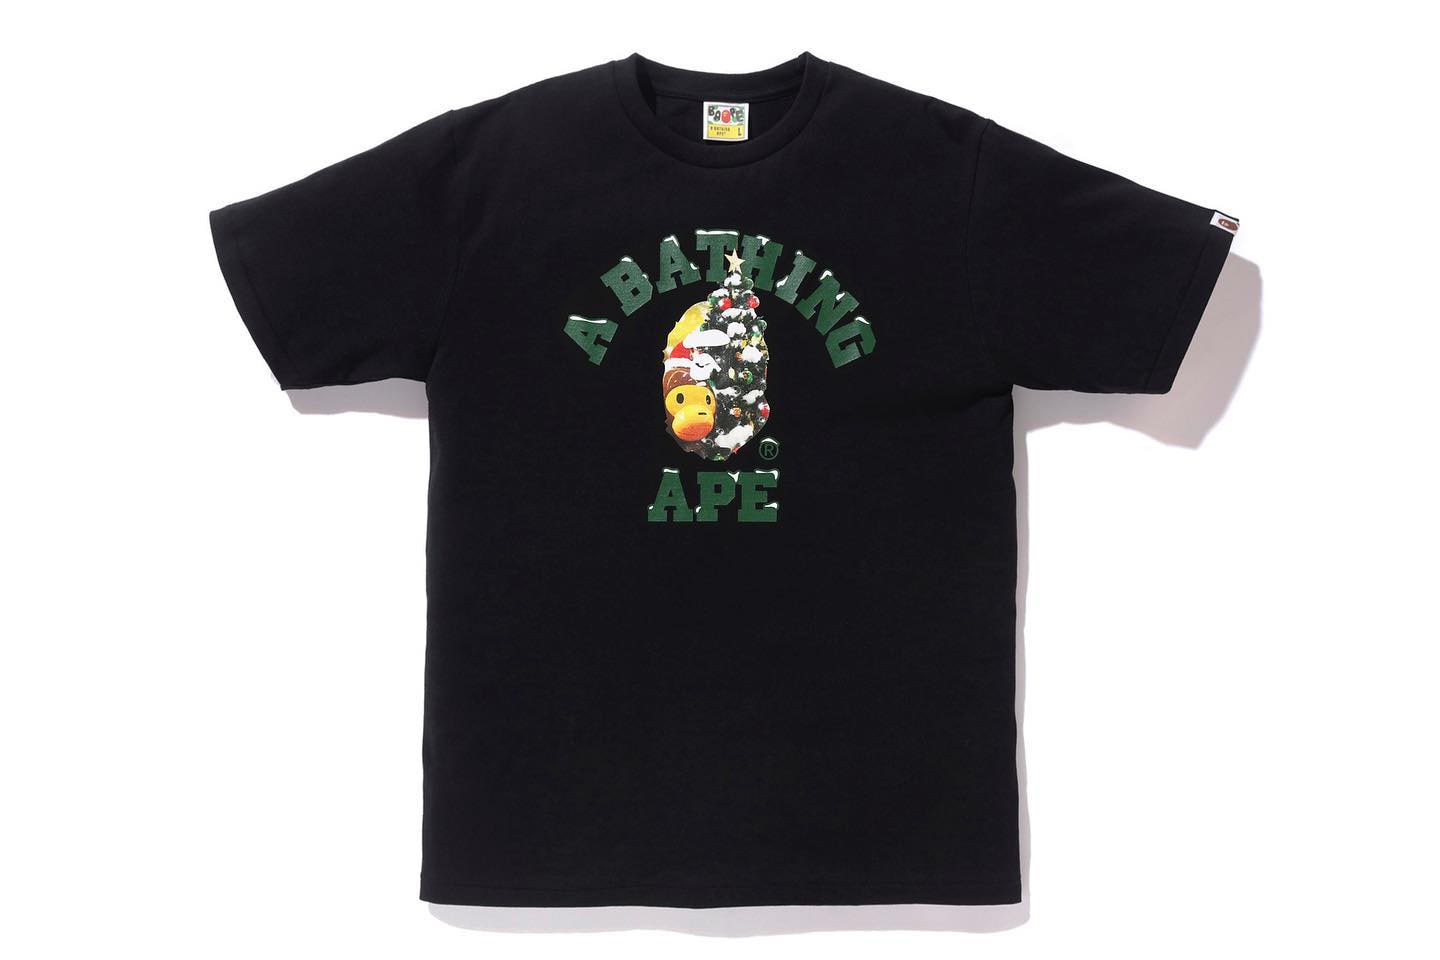 BAPE Christmas 2019 Collection a bathing ape t-shirts hoodies green red white baby milo x'mas stocking 